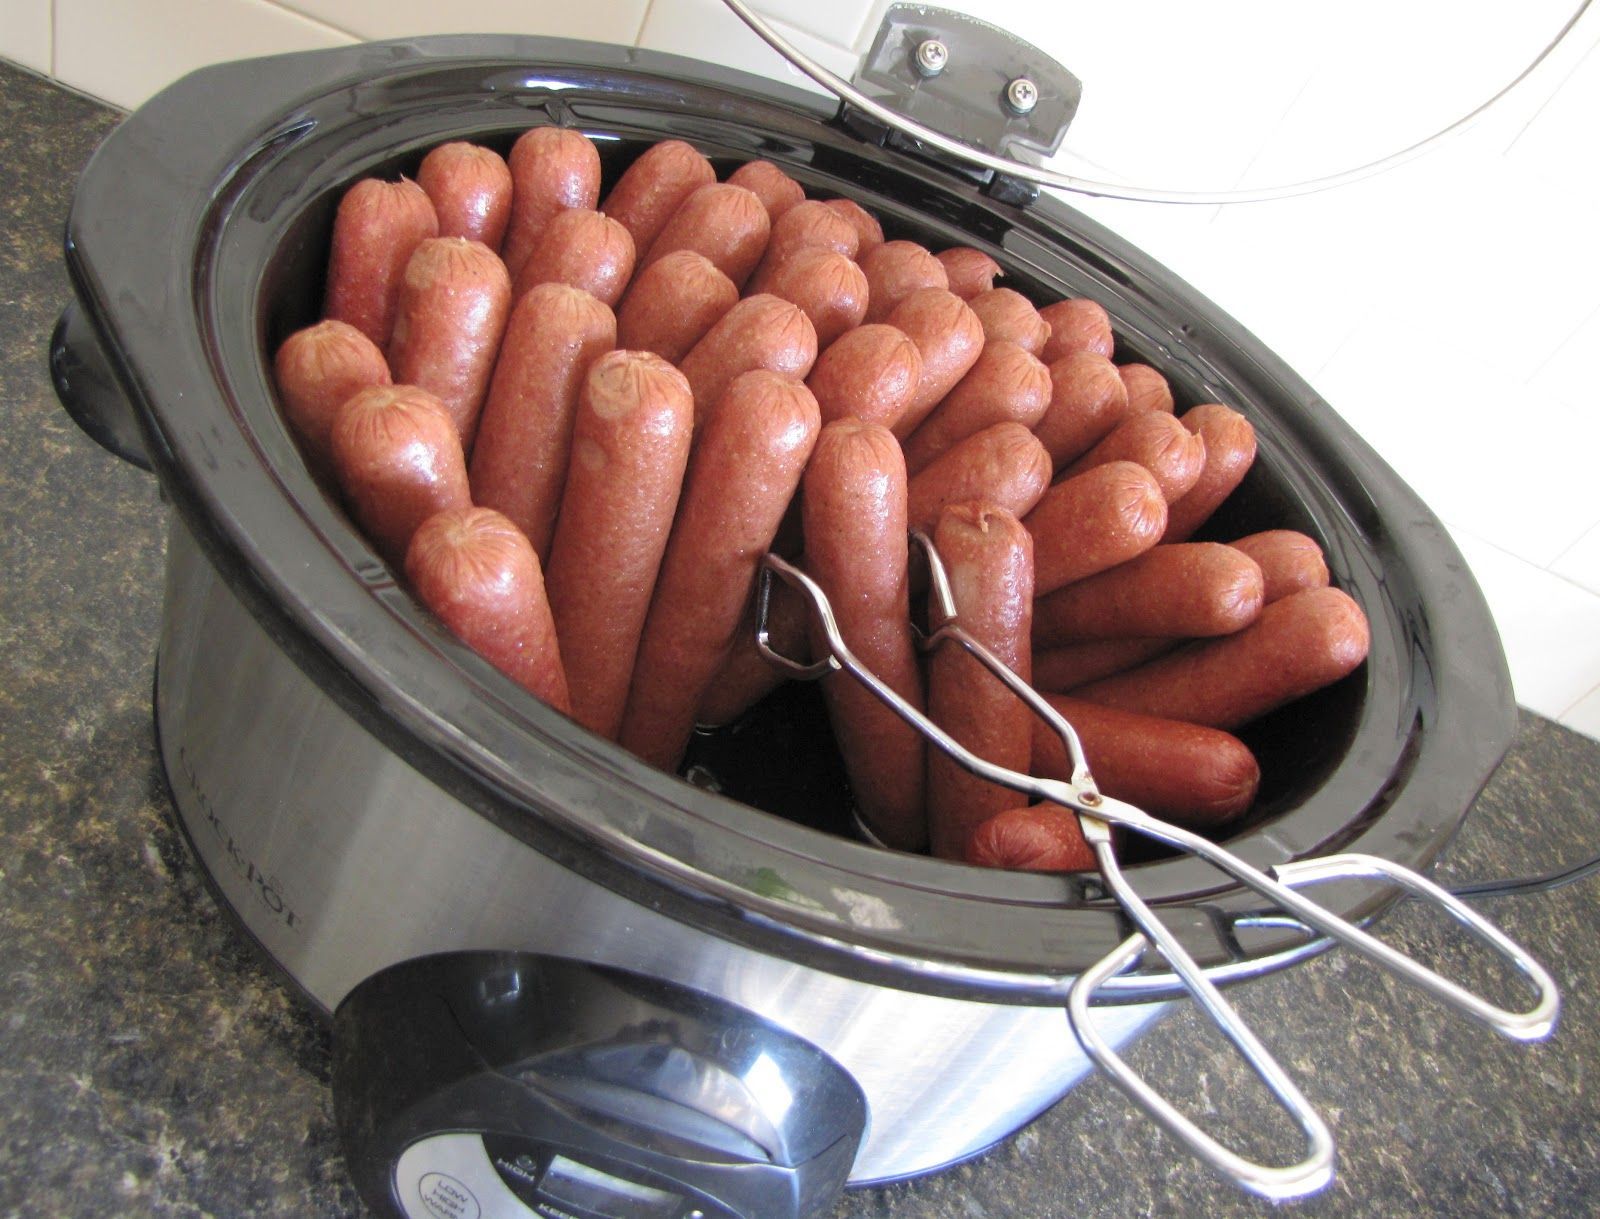 cook hot dogs for a crowd,